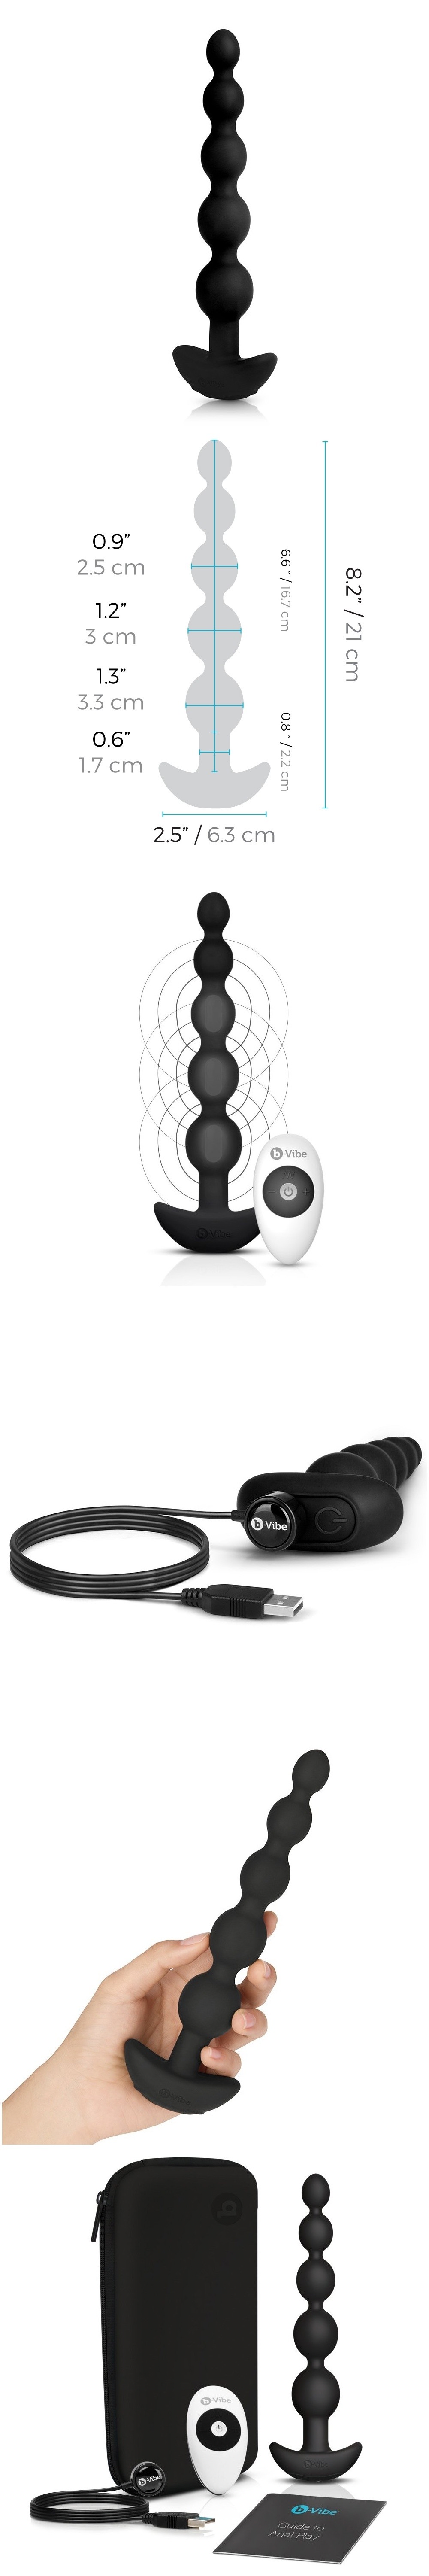 b-Vibe Cinco Vibrating Anal Beads Plug with Remote Controlled